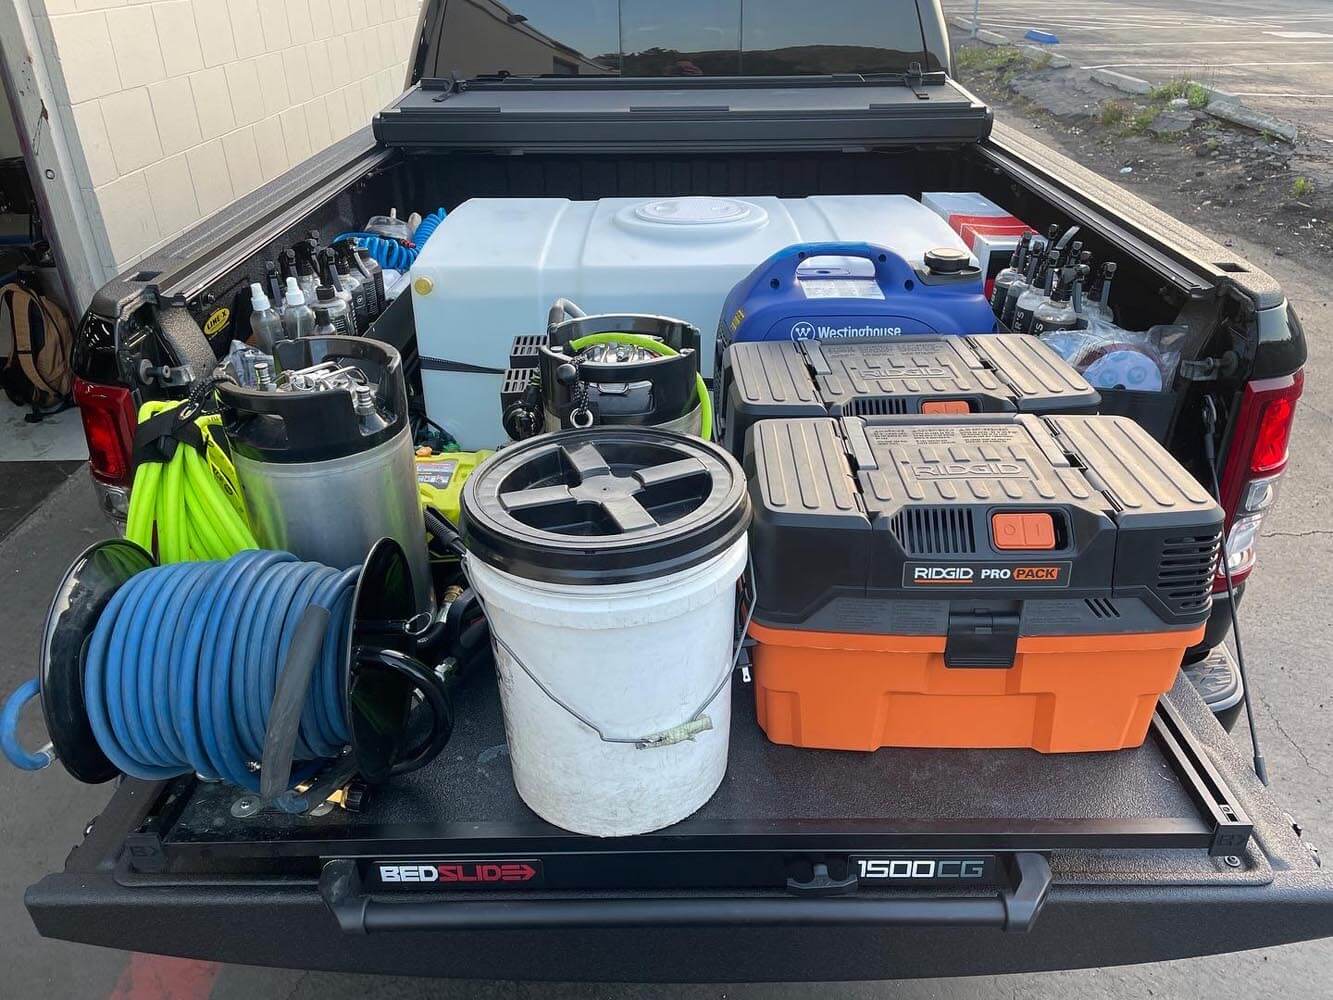 The back of a truck is filled with tools and equipment.